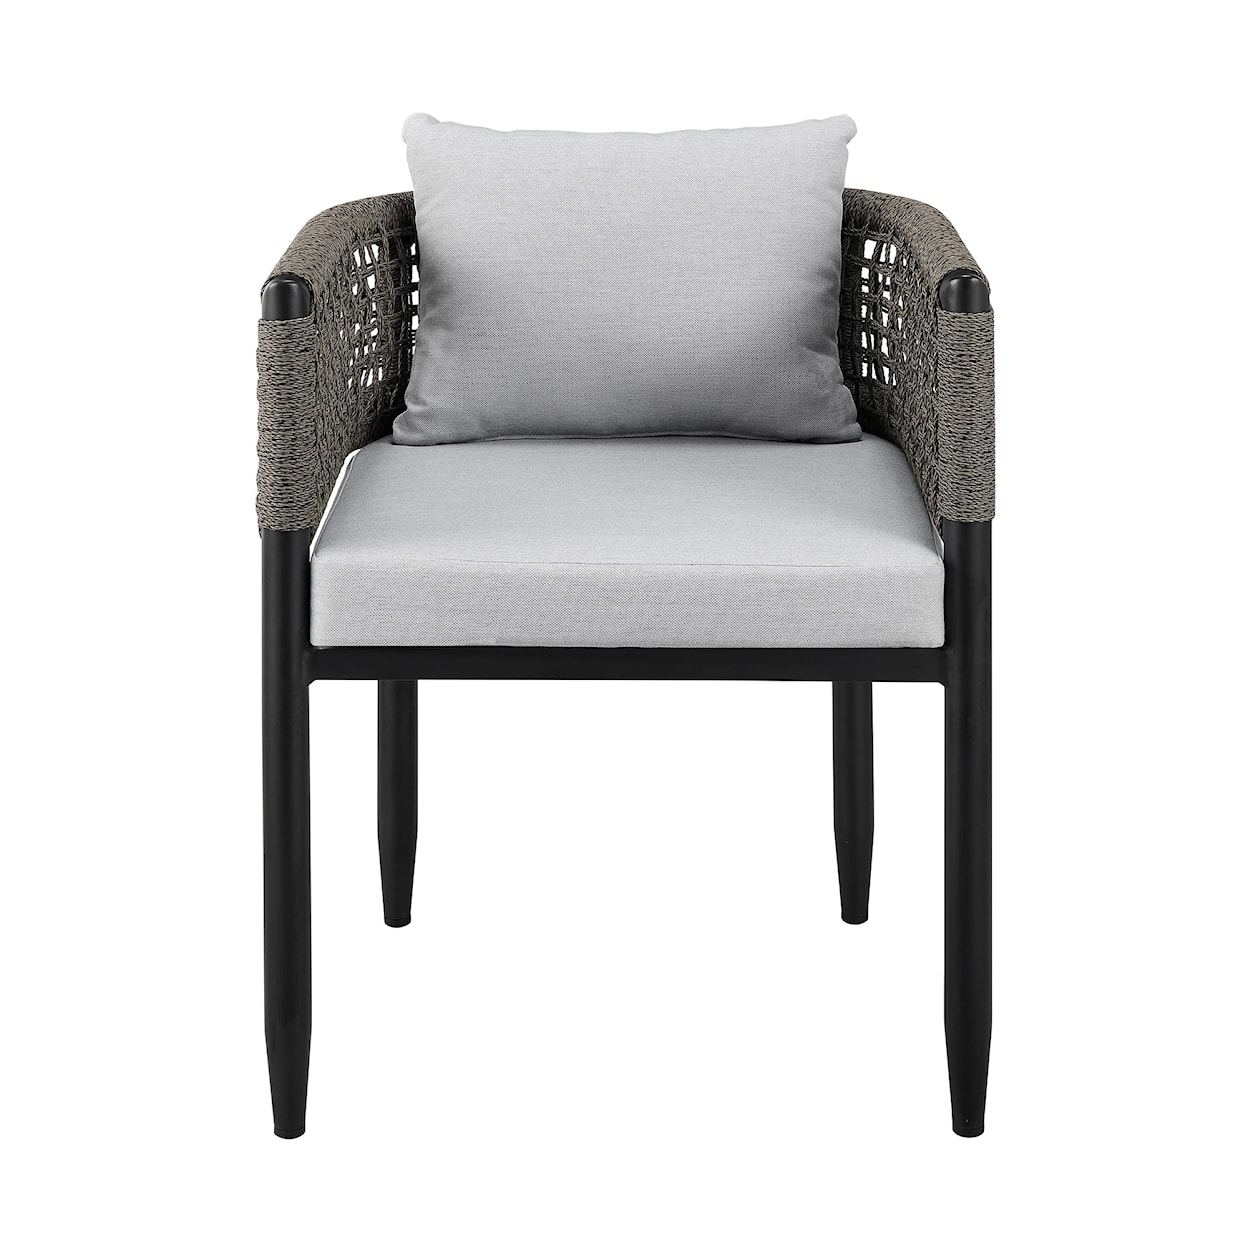 Armen Living Alegria Set of 2 Outdoor Chairs